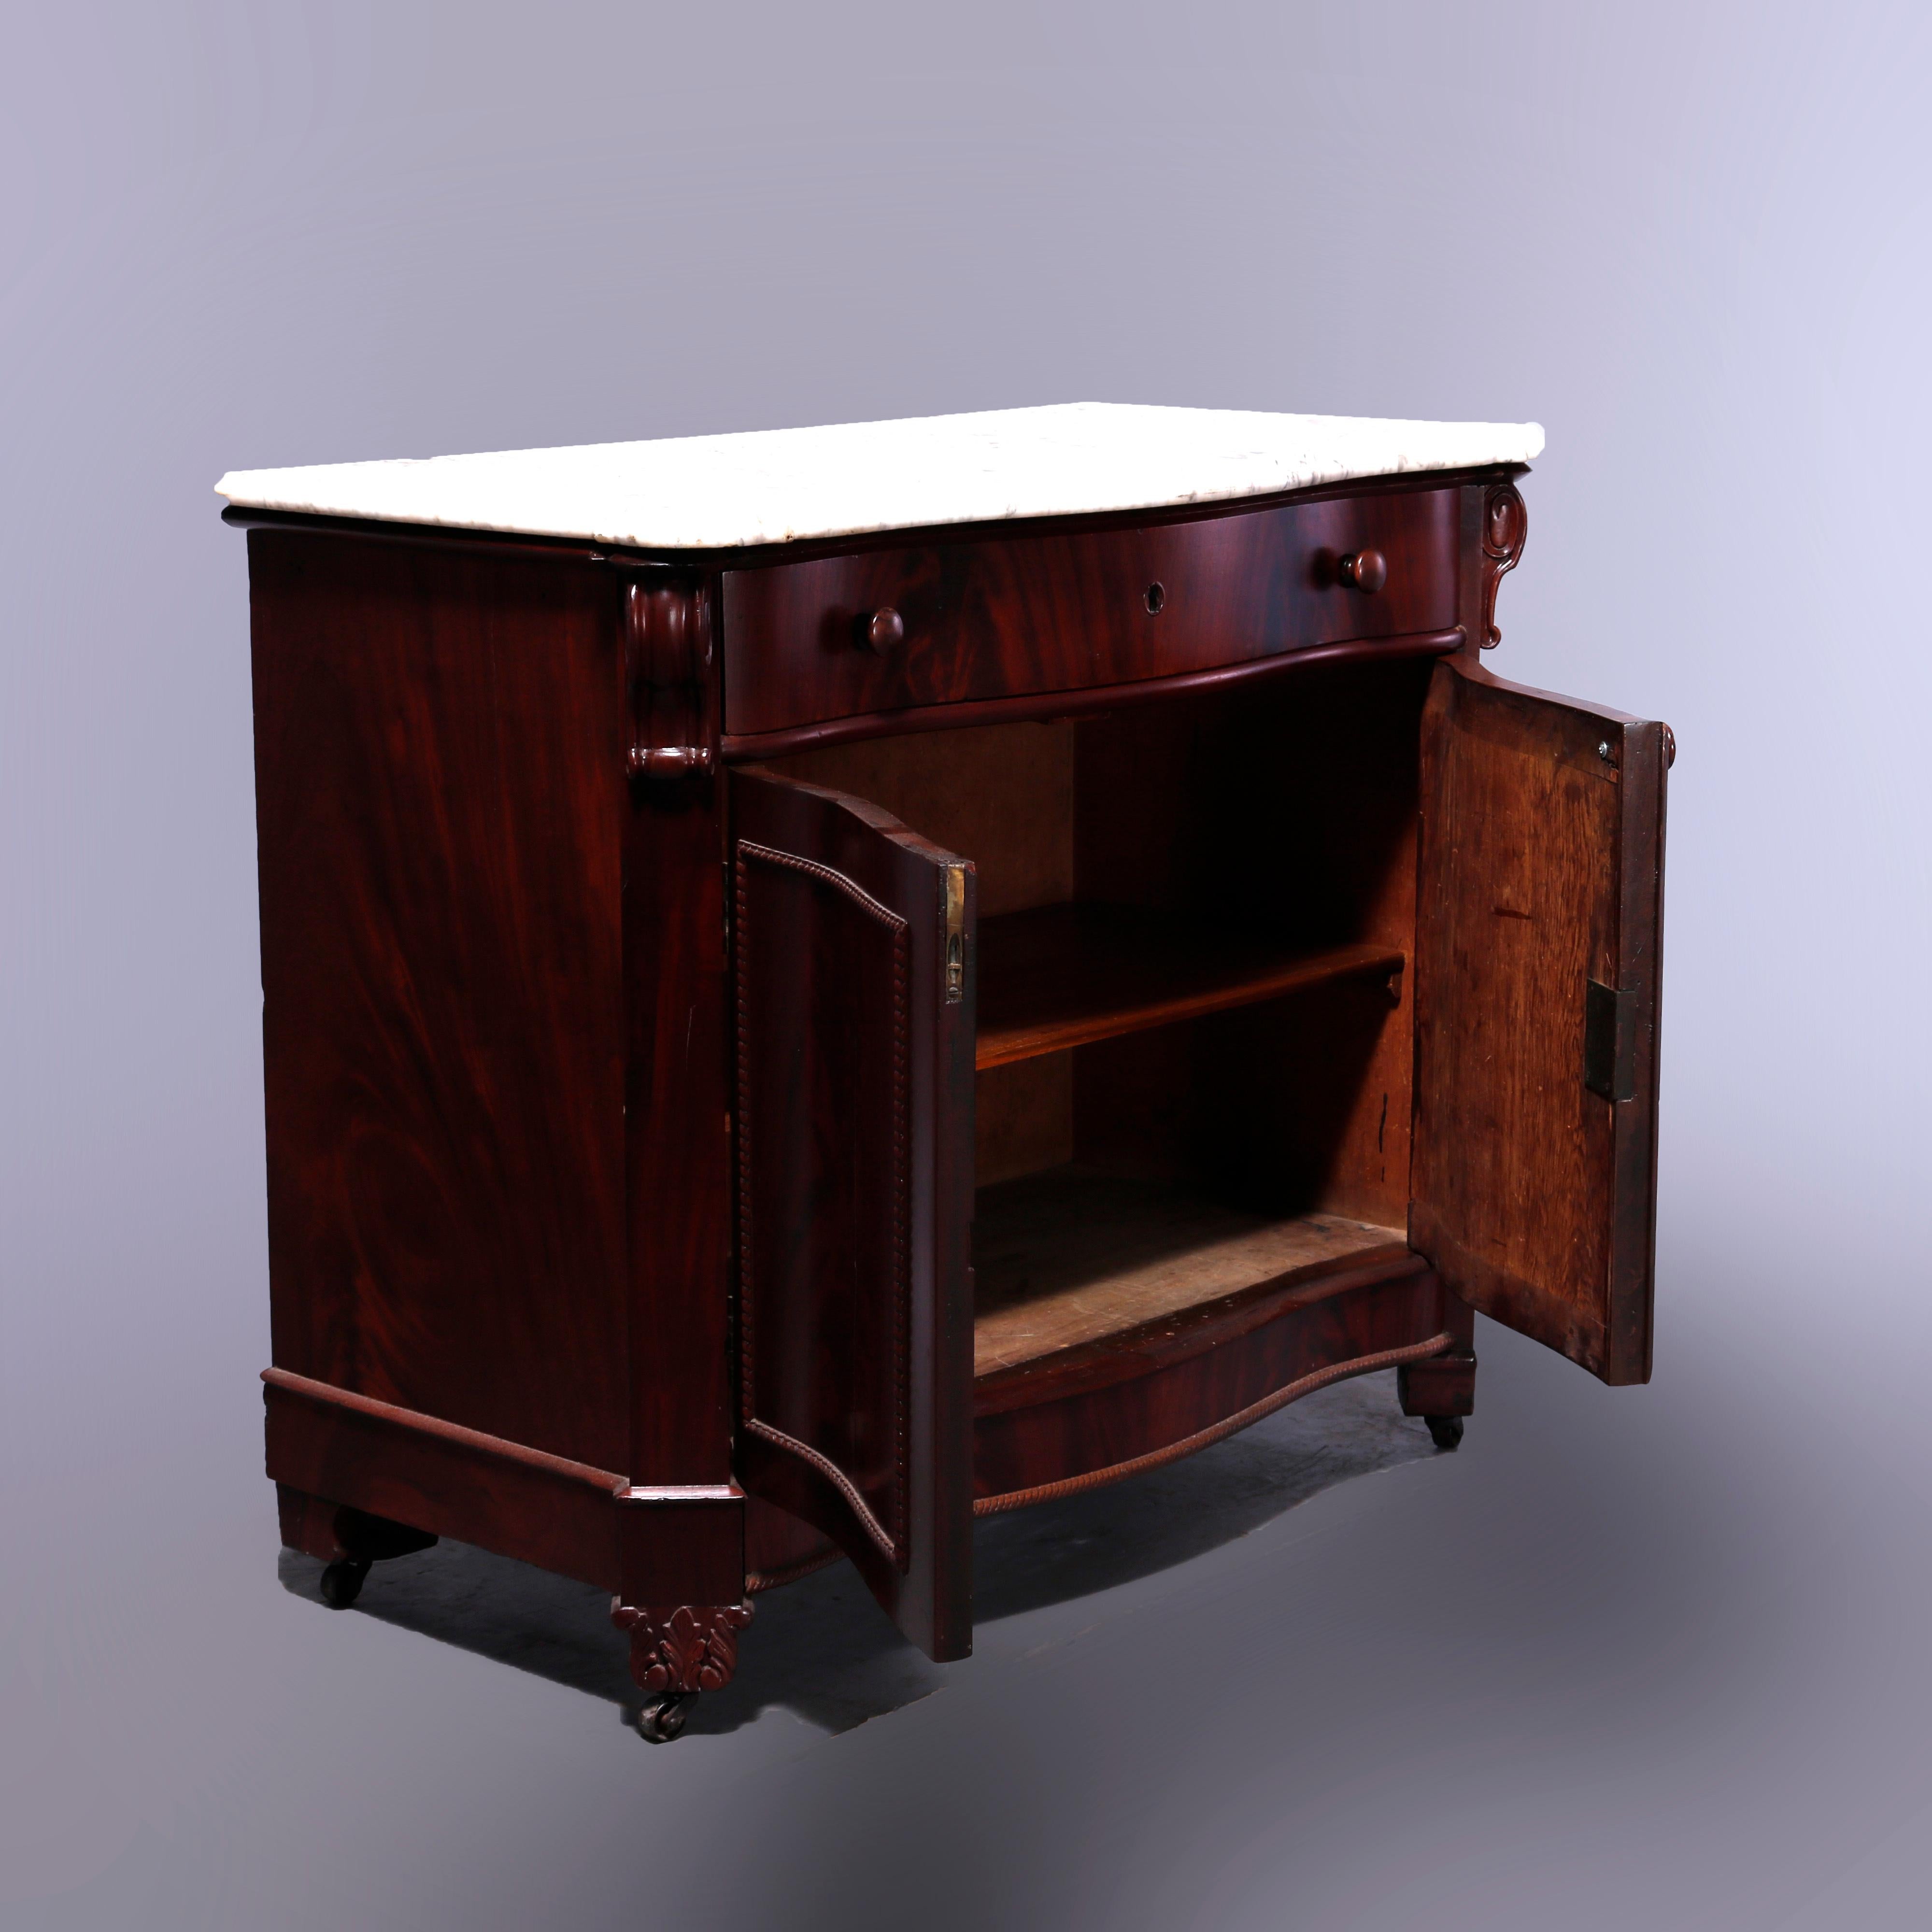 Beveled Antique American Empire Flame Mahogany Serpentine Marble-Top Commode, c1860